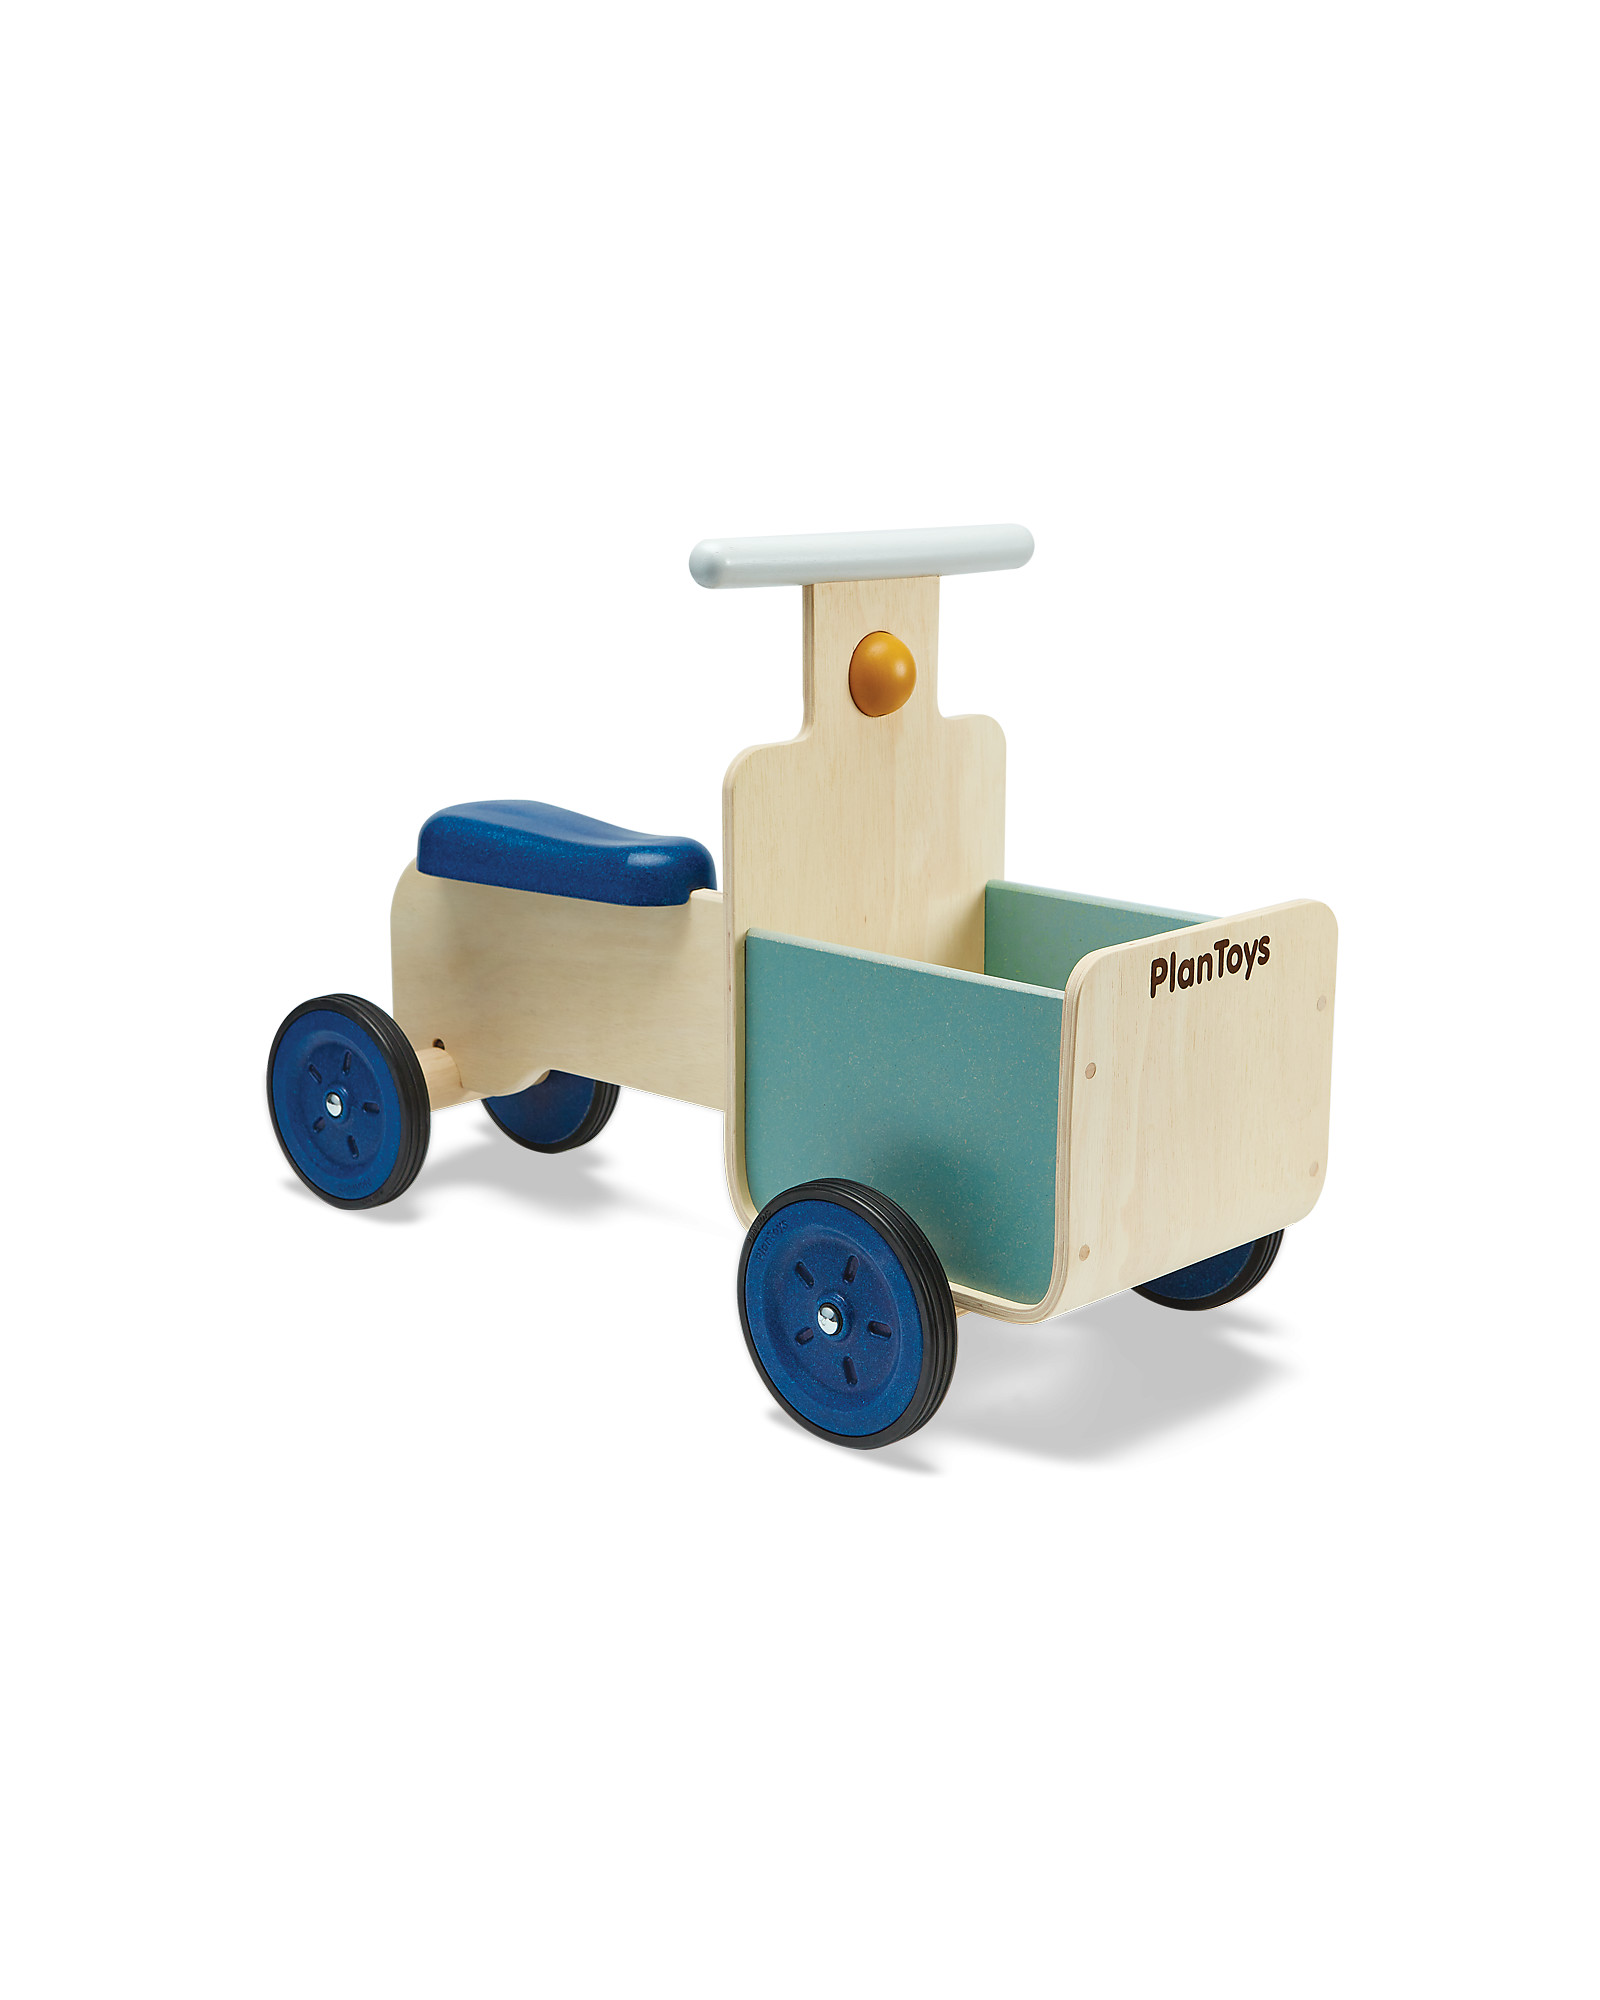 PlanToys Delivery Bike - Wooden Bike with Storage Container and Chalkboard  Details - 18 months/5 years - Orchard Collection - Light Blue unisex  (bambini)